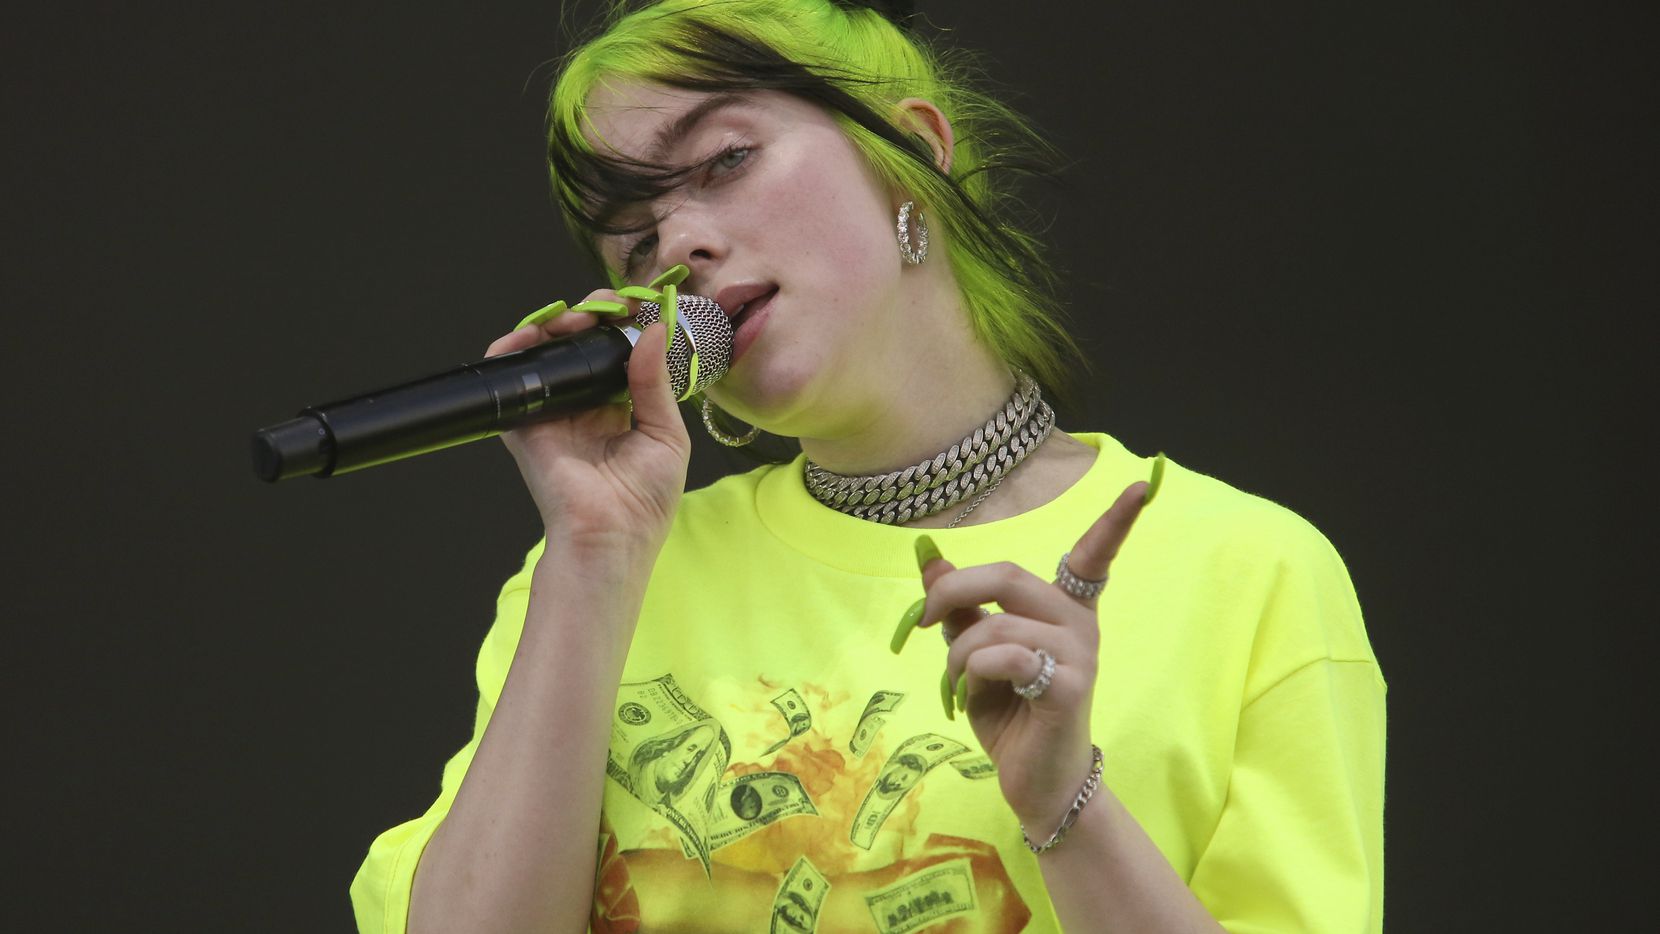 Billie Eilish, pictured here at Austin City Limits, is one of the biggest pop stars in the world right now.